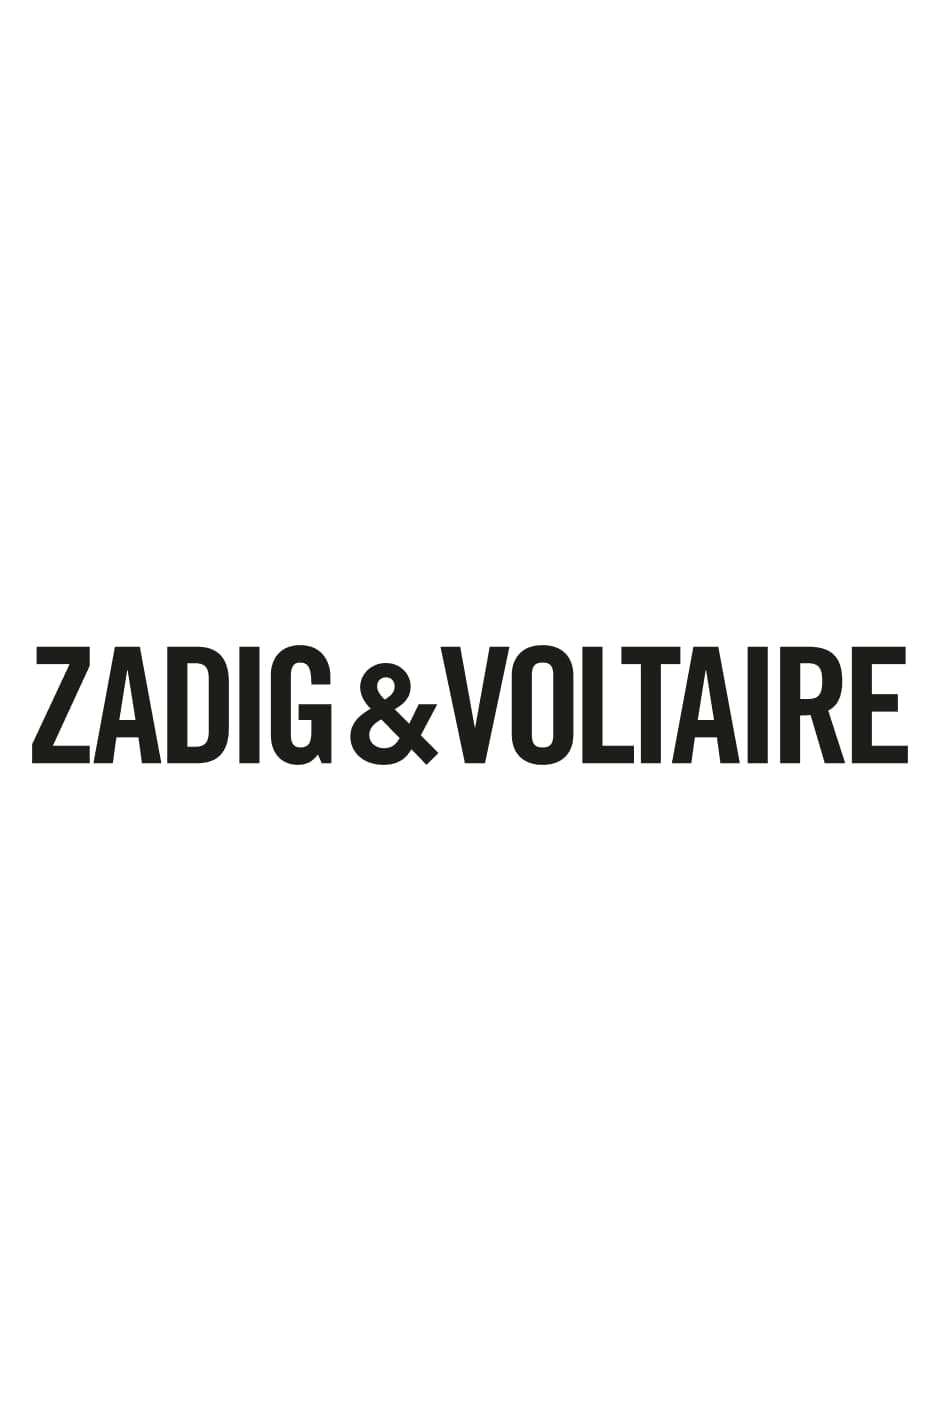 Zadig & Voltaire Xs Sunny Grained Leather Shoulder Bag in Black Womens Bags Shoulder bags 